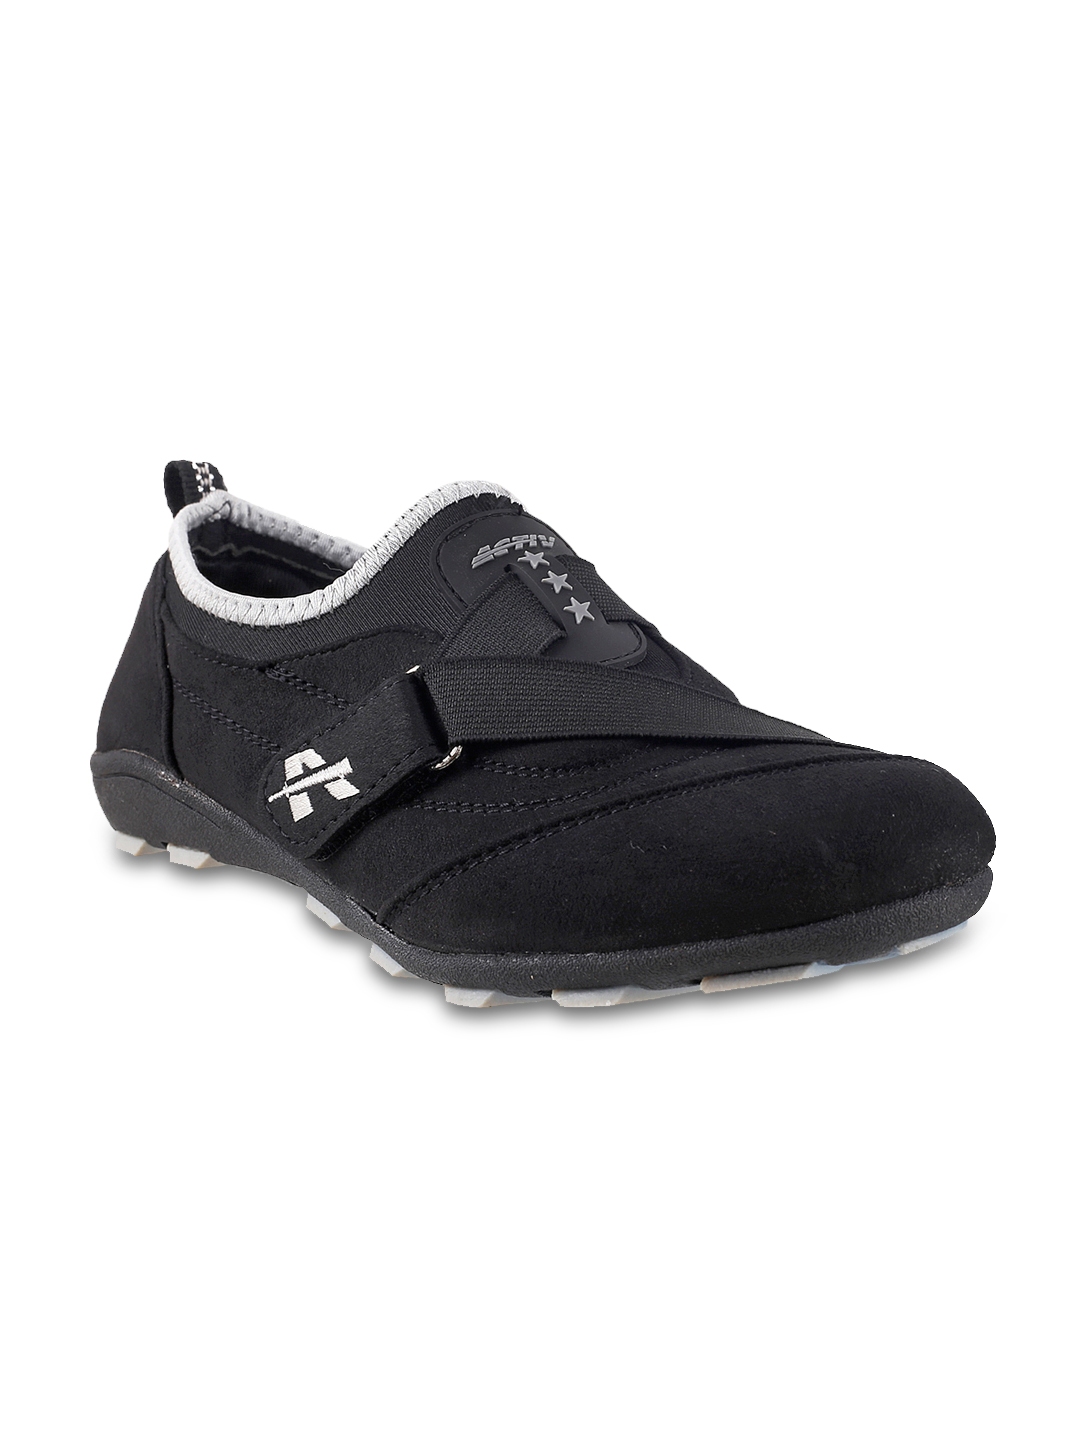 Sports Shoes for Women - Metro Shoes